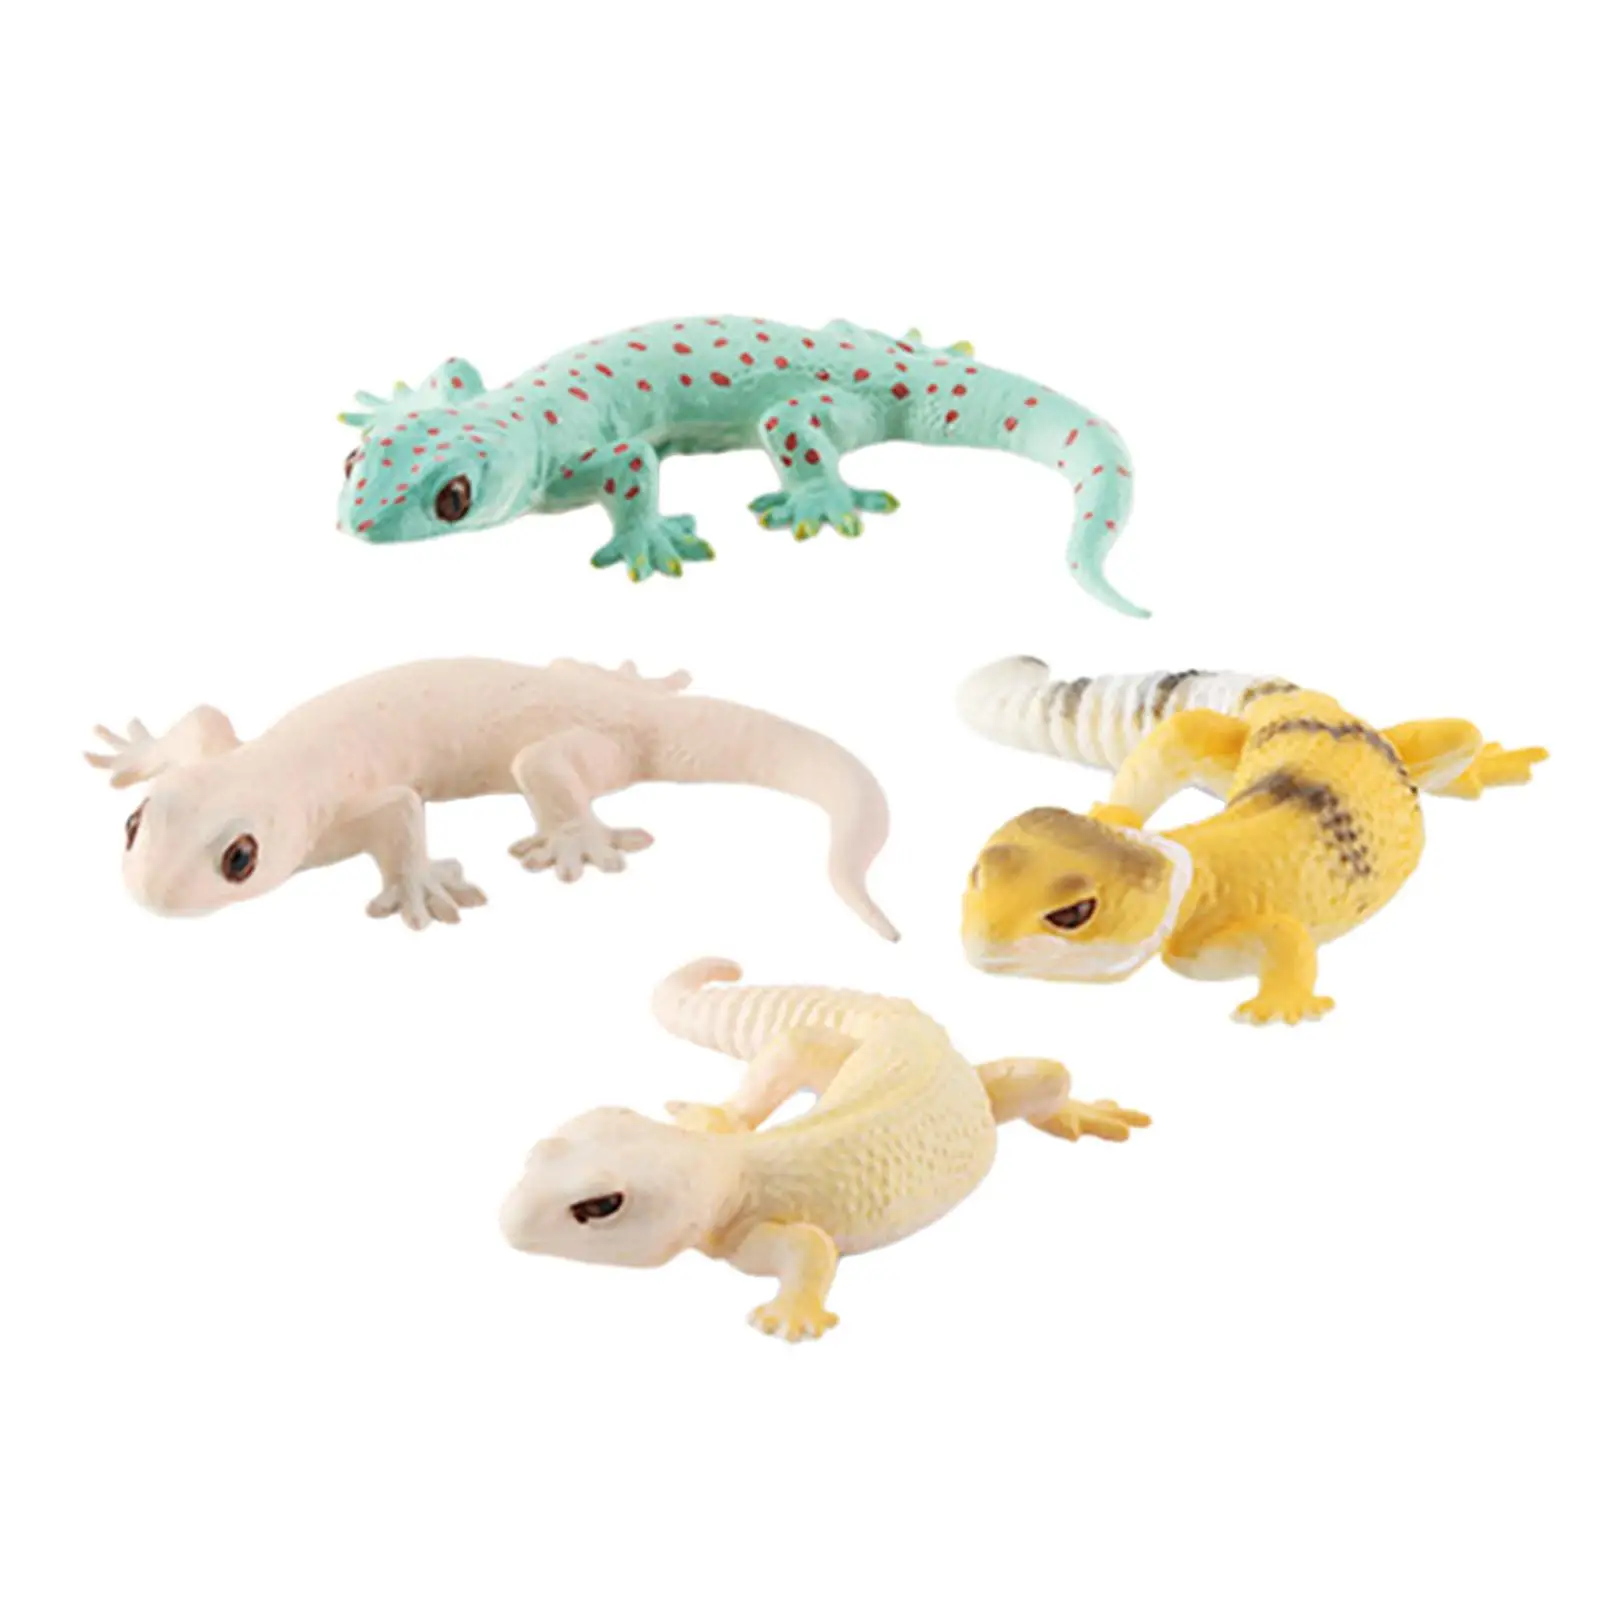 4x Mini Animals Model Gifts Decorations Lizards Toy for Scene Layout Props DIY Projects